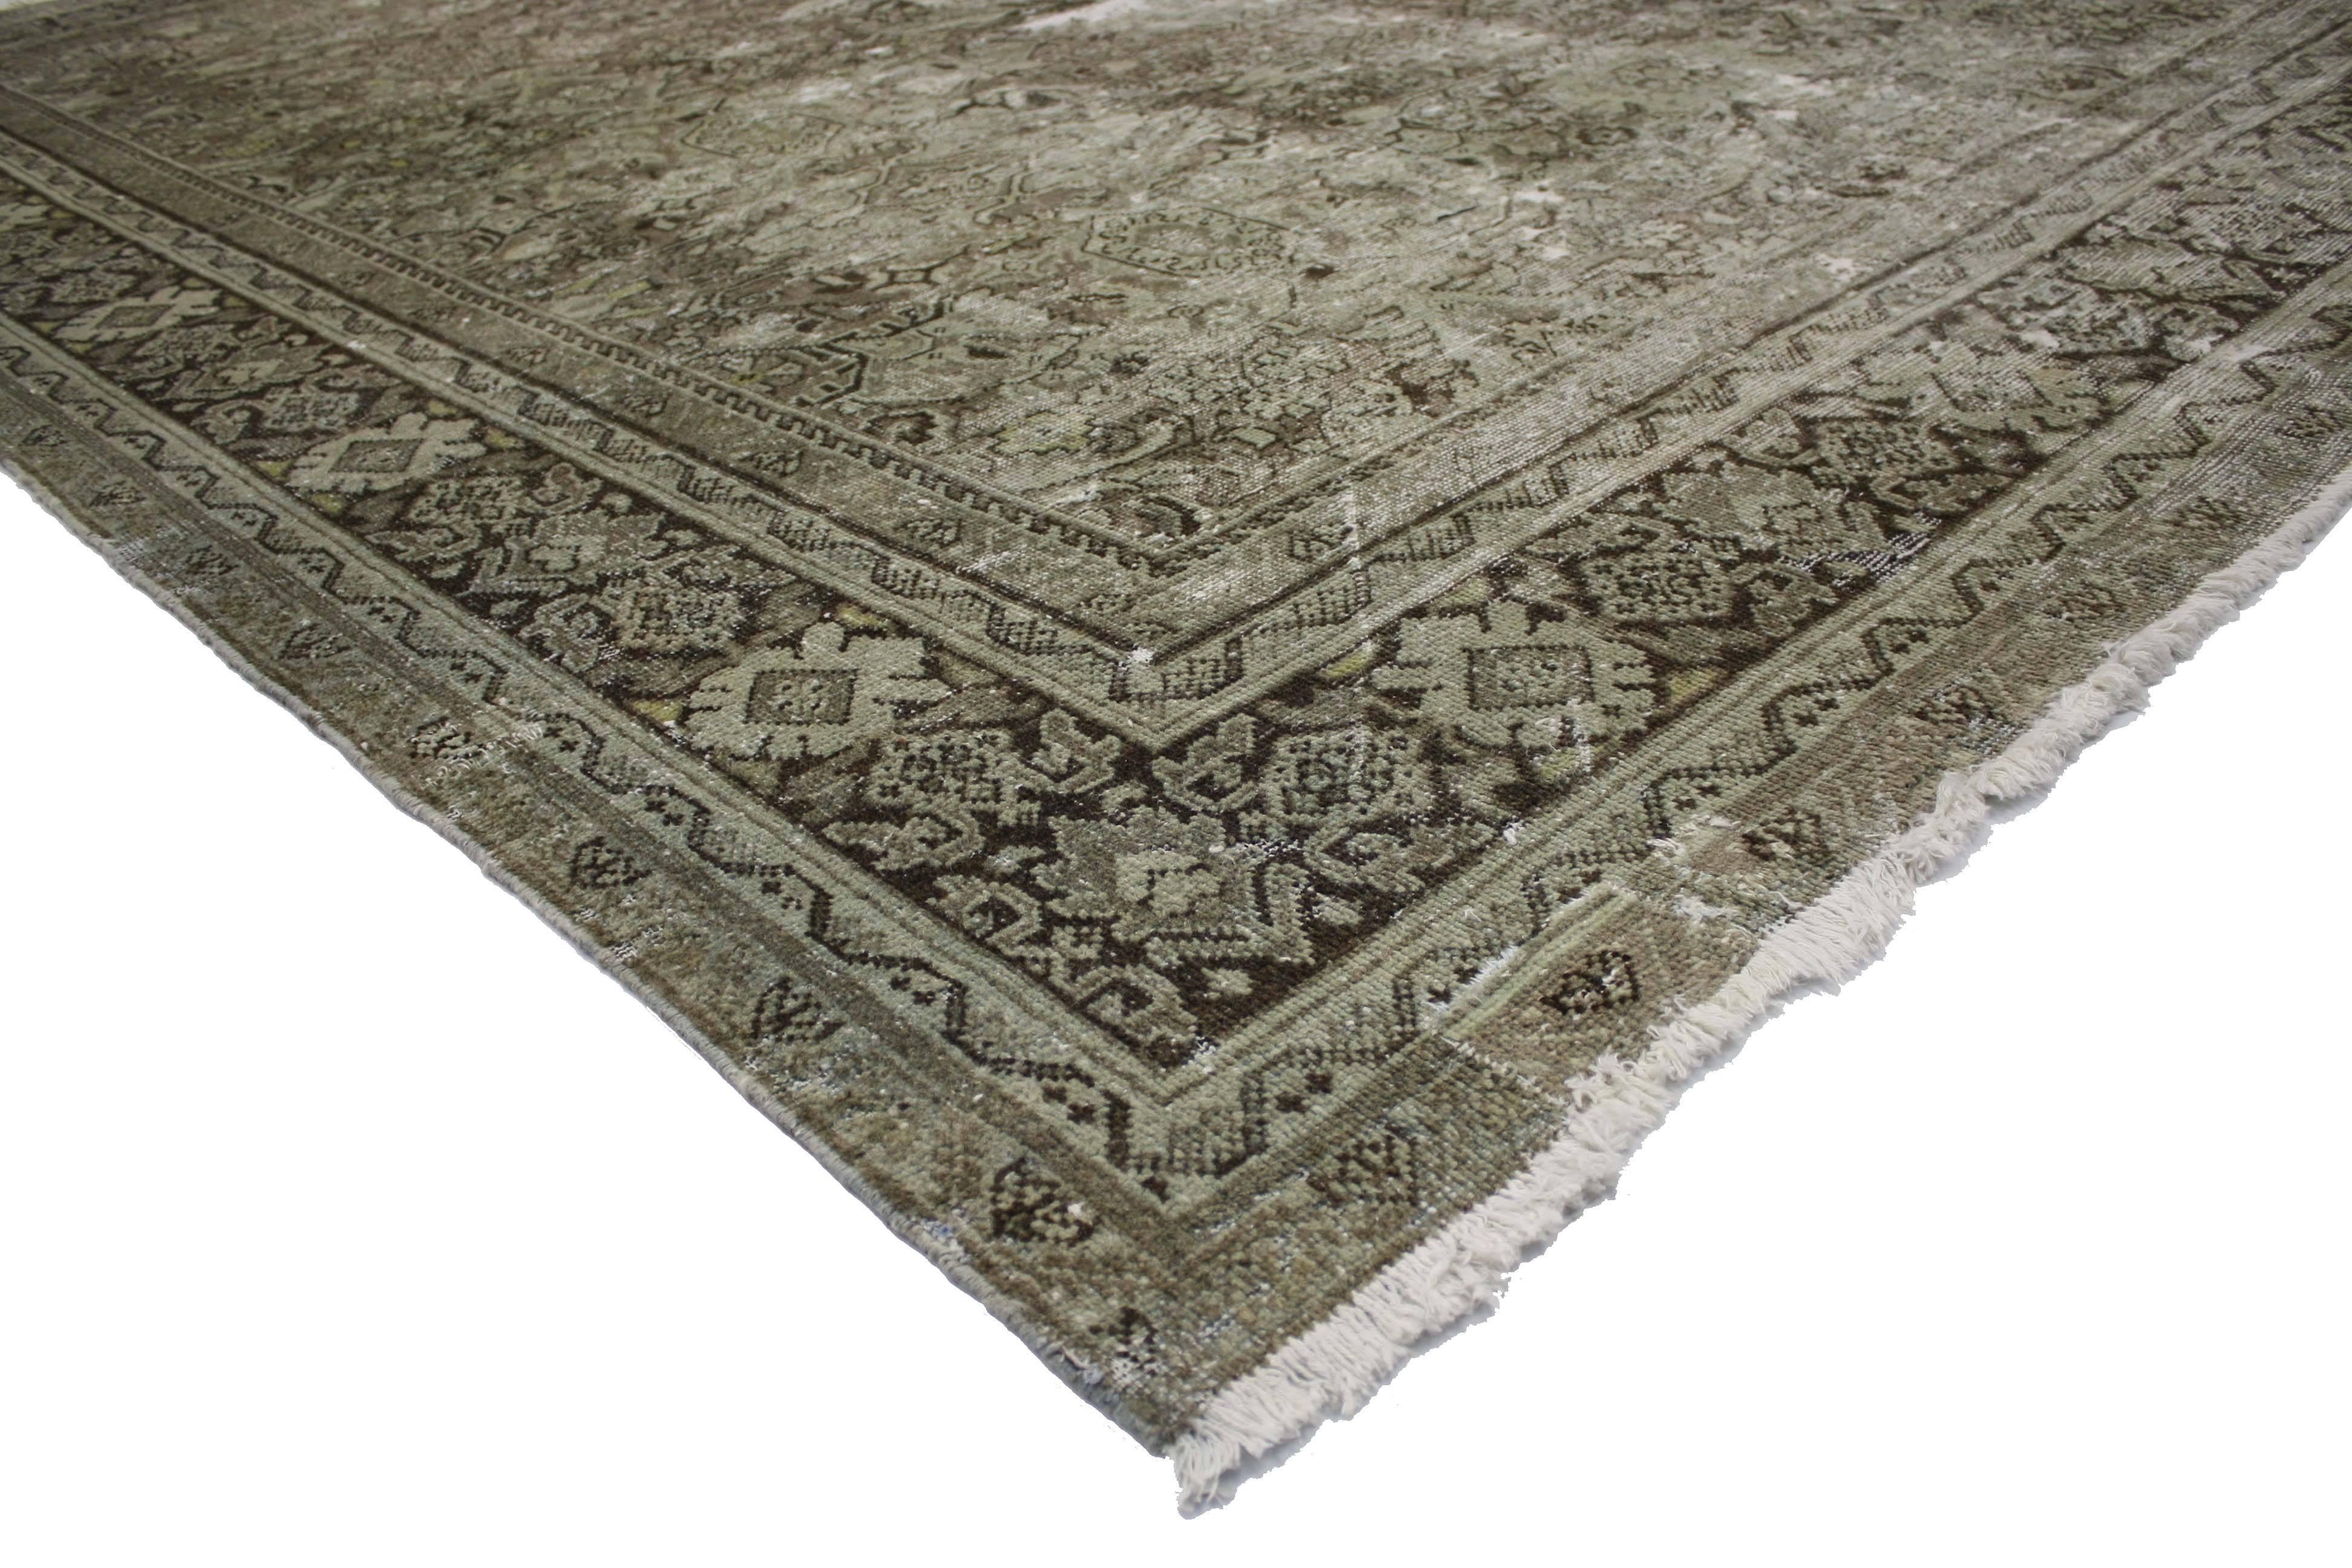 Antique-Worn Persian Mahal Rug, Relaxed Refinement Meets Earth-Tone Elegance 1